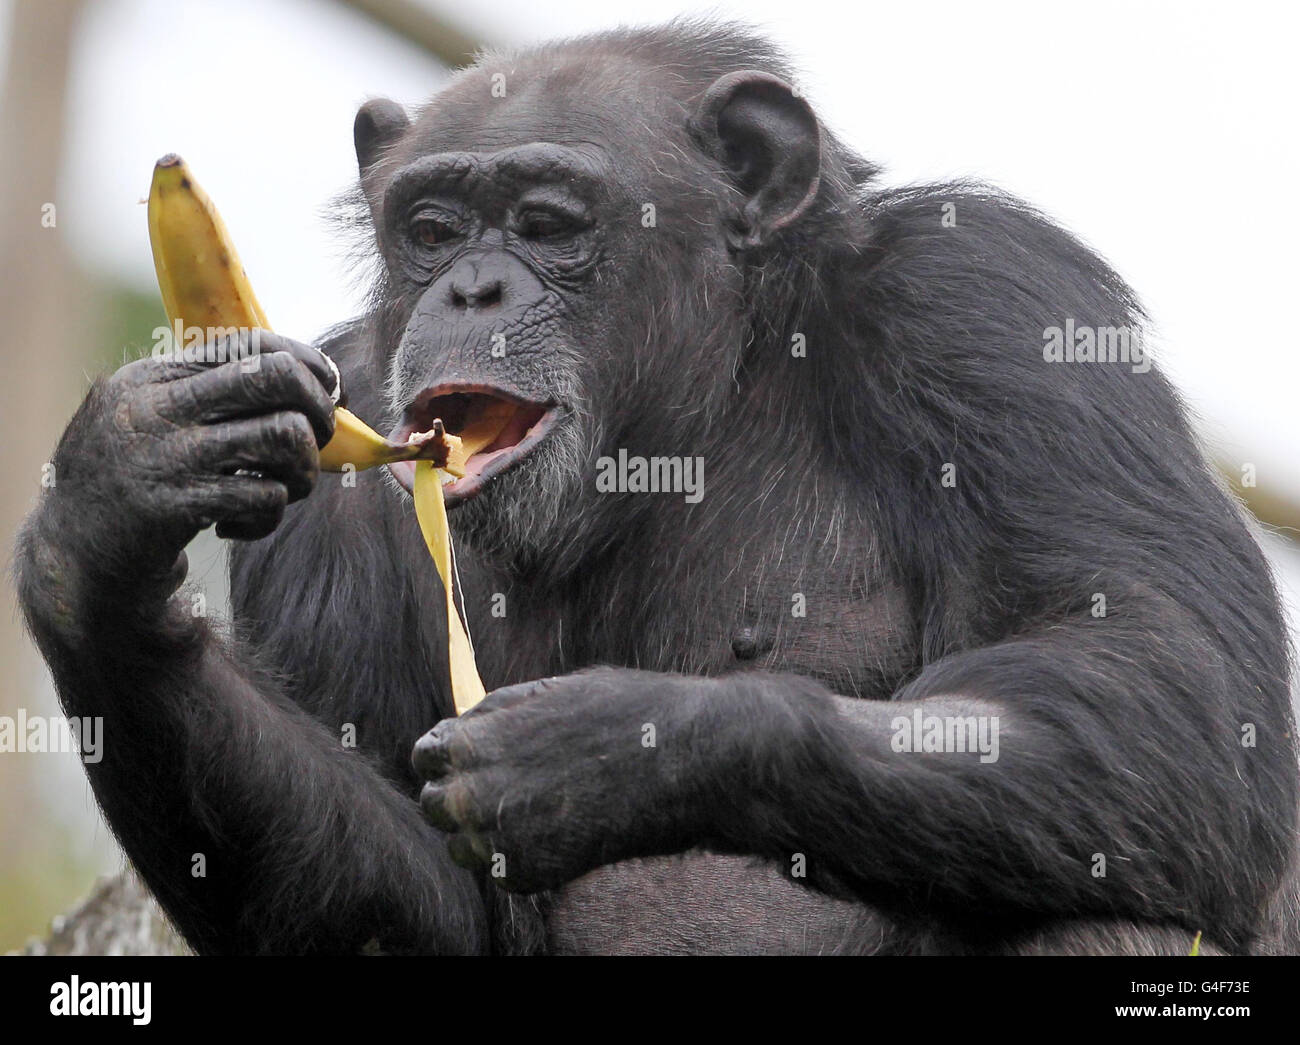 Rosie the chimpanzee is back to full health and enjoying a banana at ...